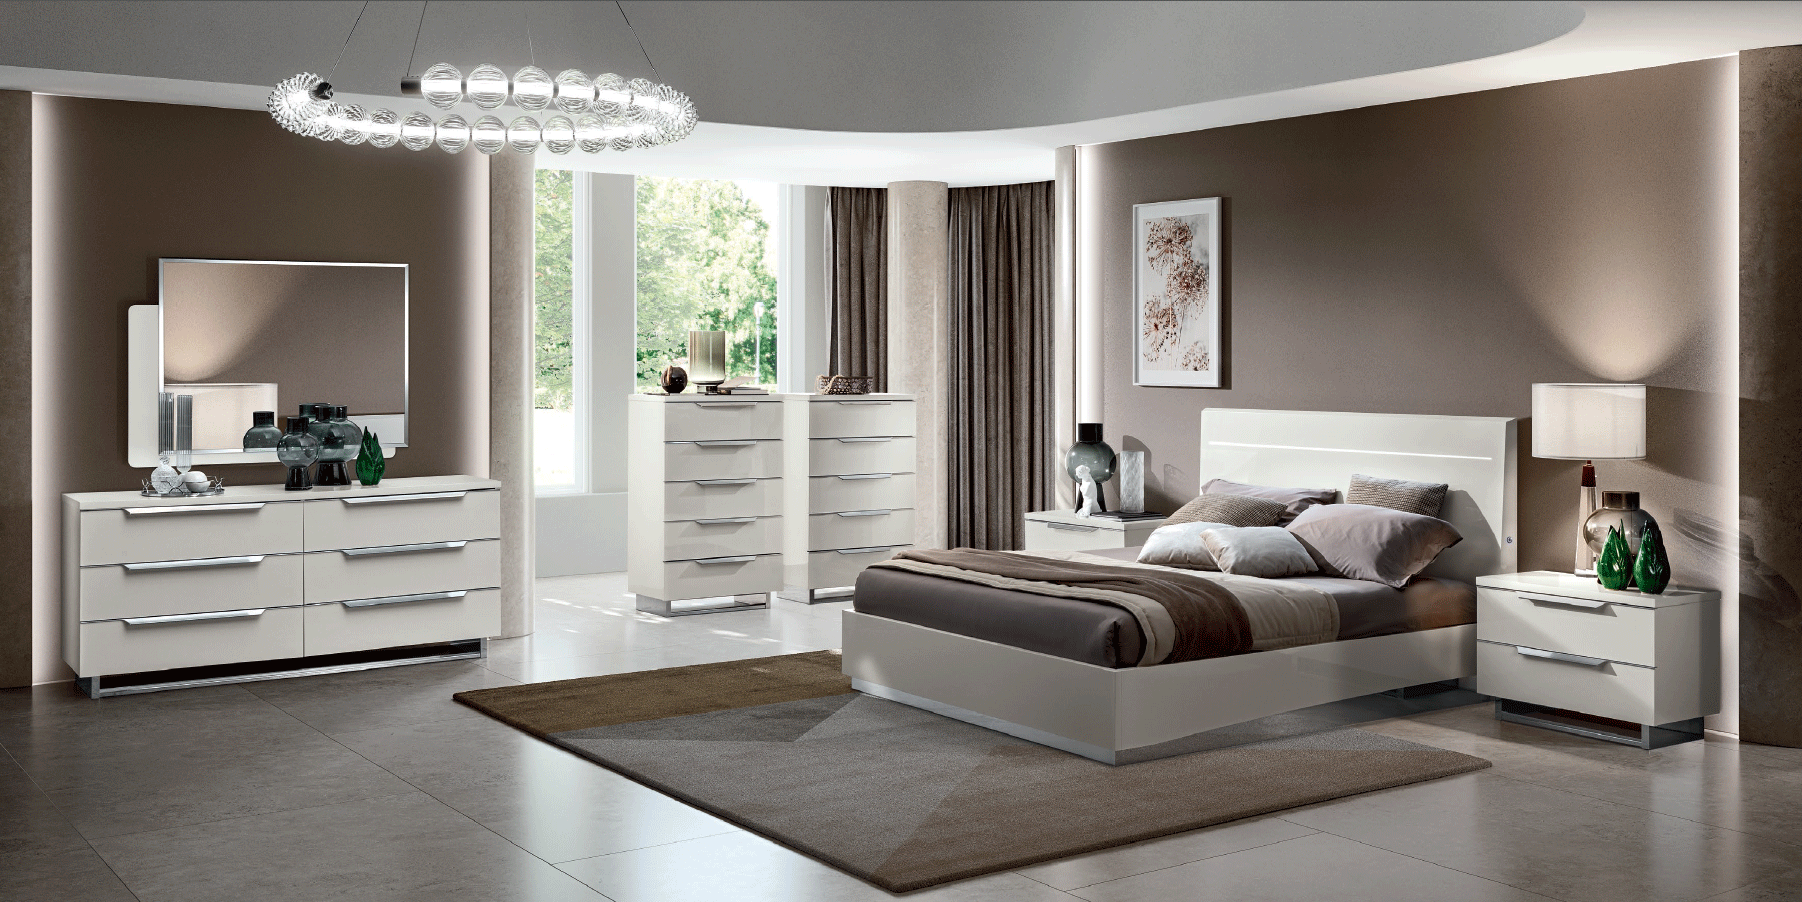 Bedroom Furniture Dressers and Chests Kimera Bedroom